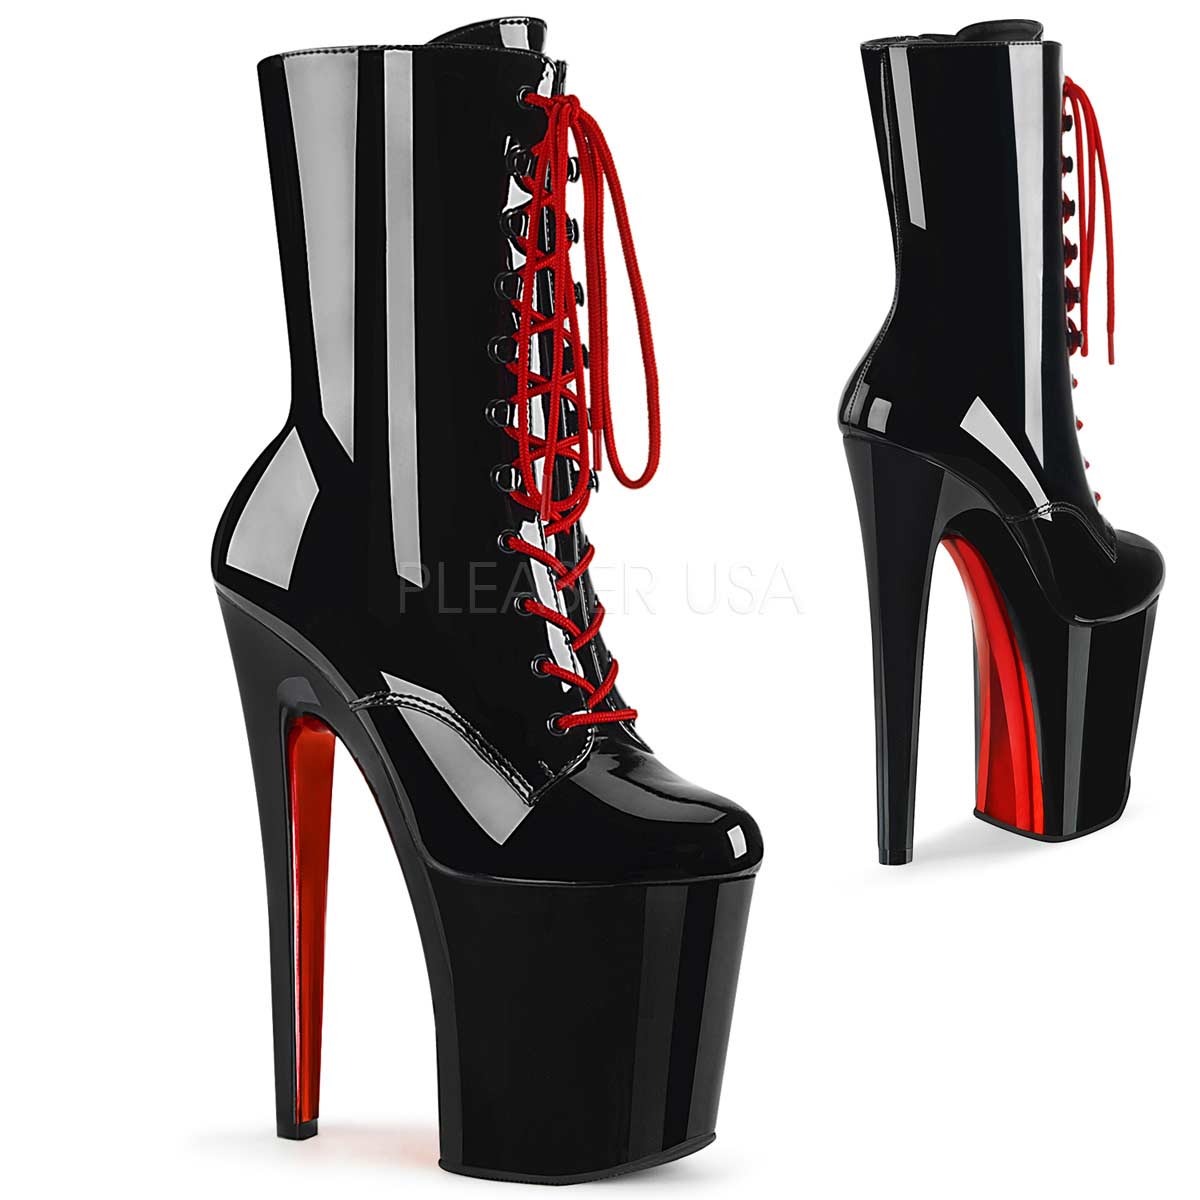 Pleaser Xtreme-1020TT - Black Pat Red Chrome in Sexy Boots - $81.95